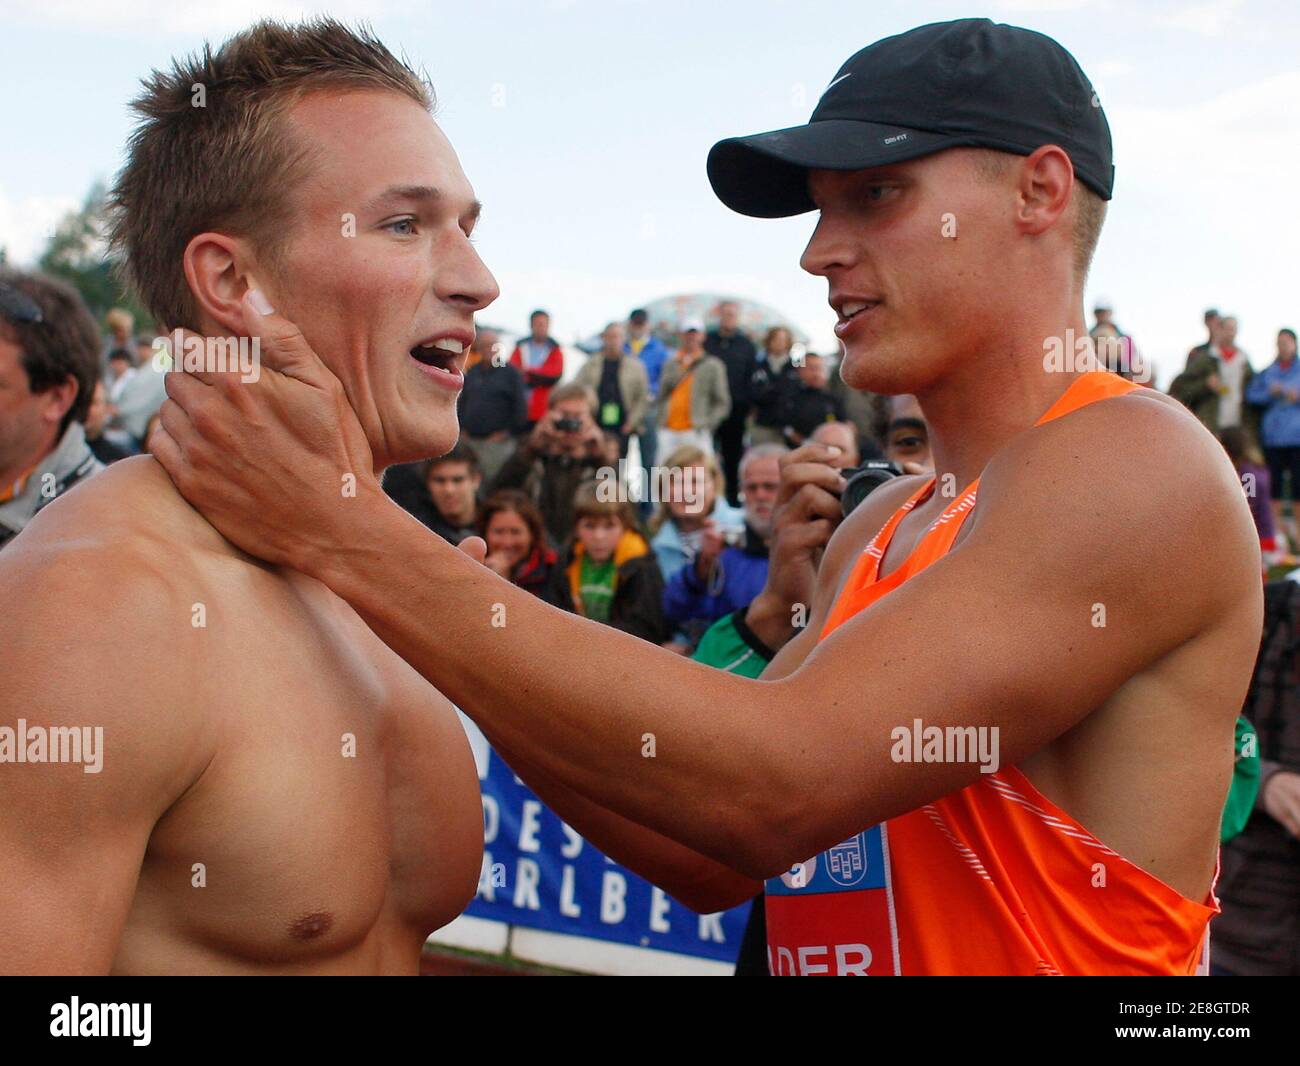 Trey Hardee of the United States (R) congratulates Germany's Michael Schrader for his victory at the two-day international decathlon meeting in Goetzis, May 31, 2009.  REUTERS/Miro Kuzmanovic (AUSTRIA SPORT ATHLETICS) Stock Photo